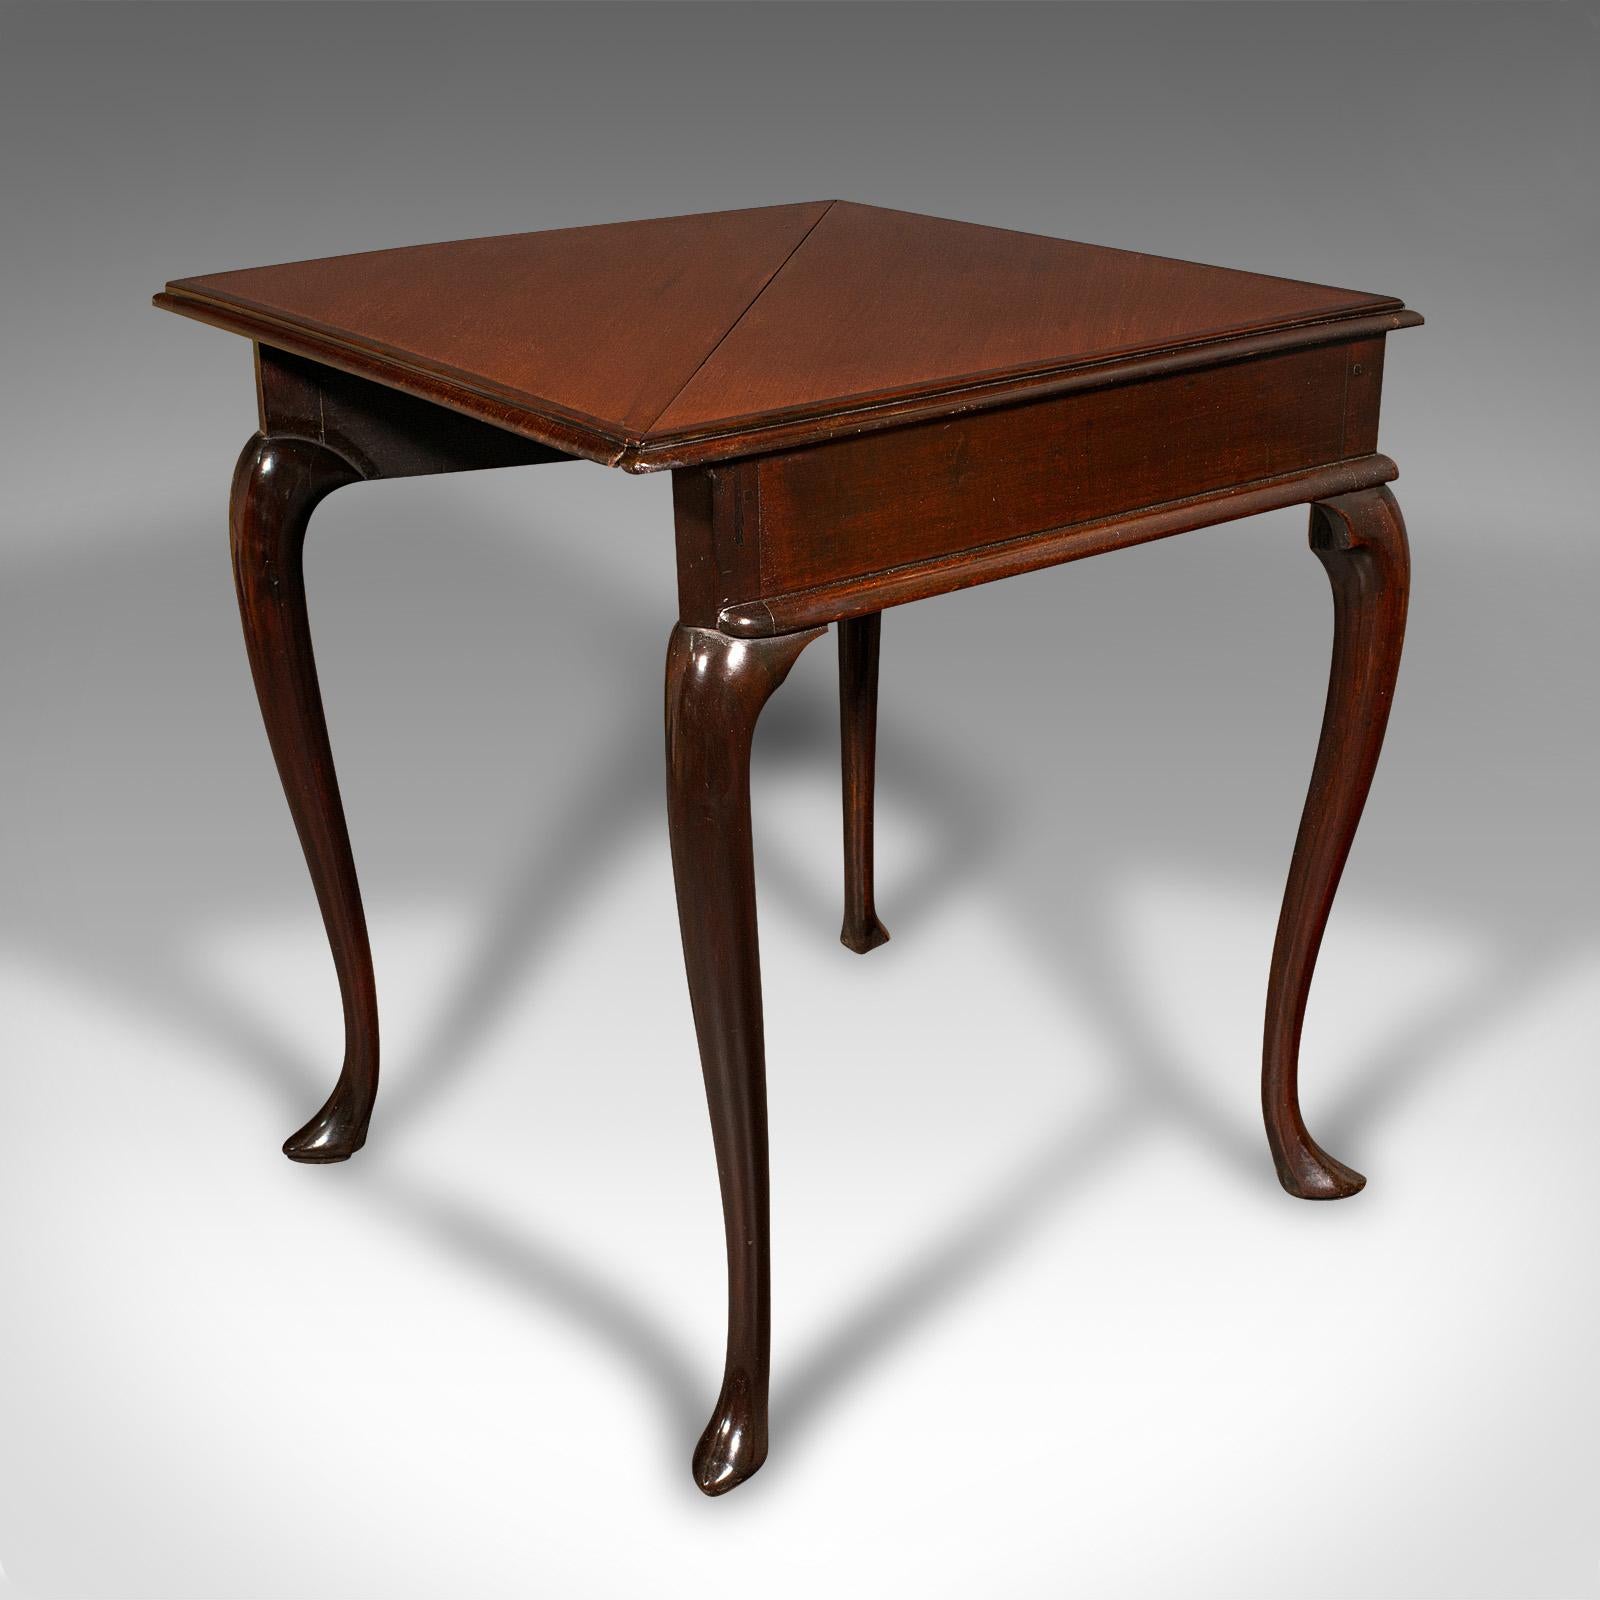 This is a rare and interesting antique supper table. An English, mahogany folding occasional display table, dating to the Georgian period, circa 1770.

Captivating mid Georgian craftsmanship with a delightful appearance
Displays a desirable aged